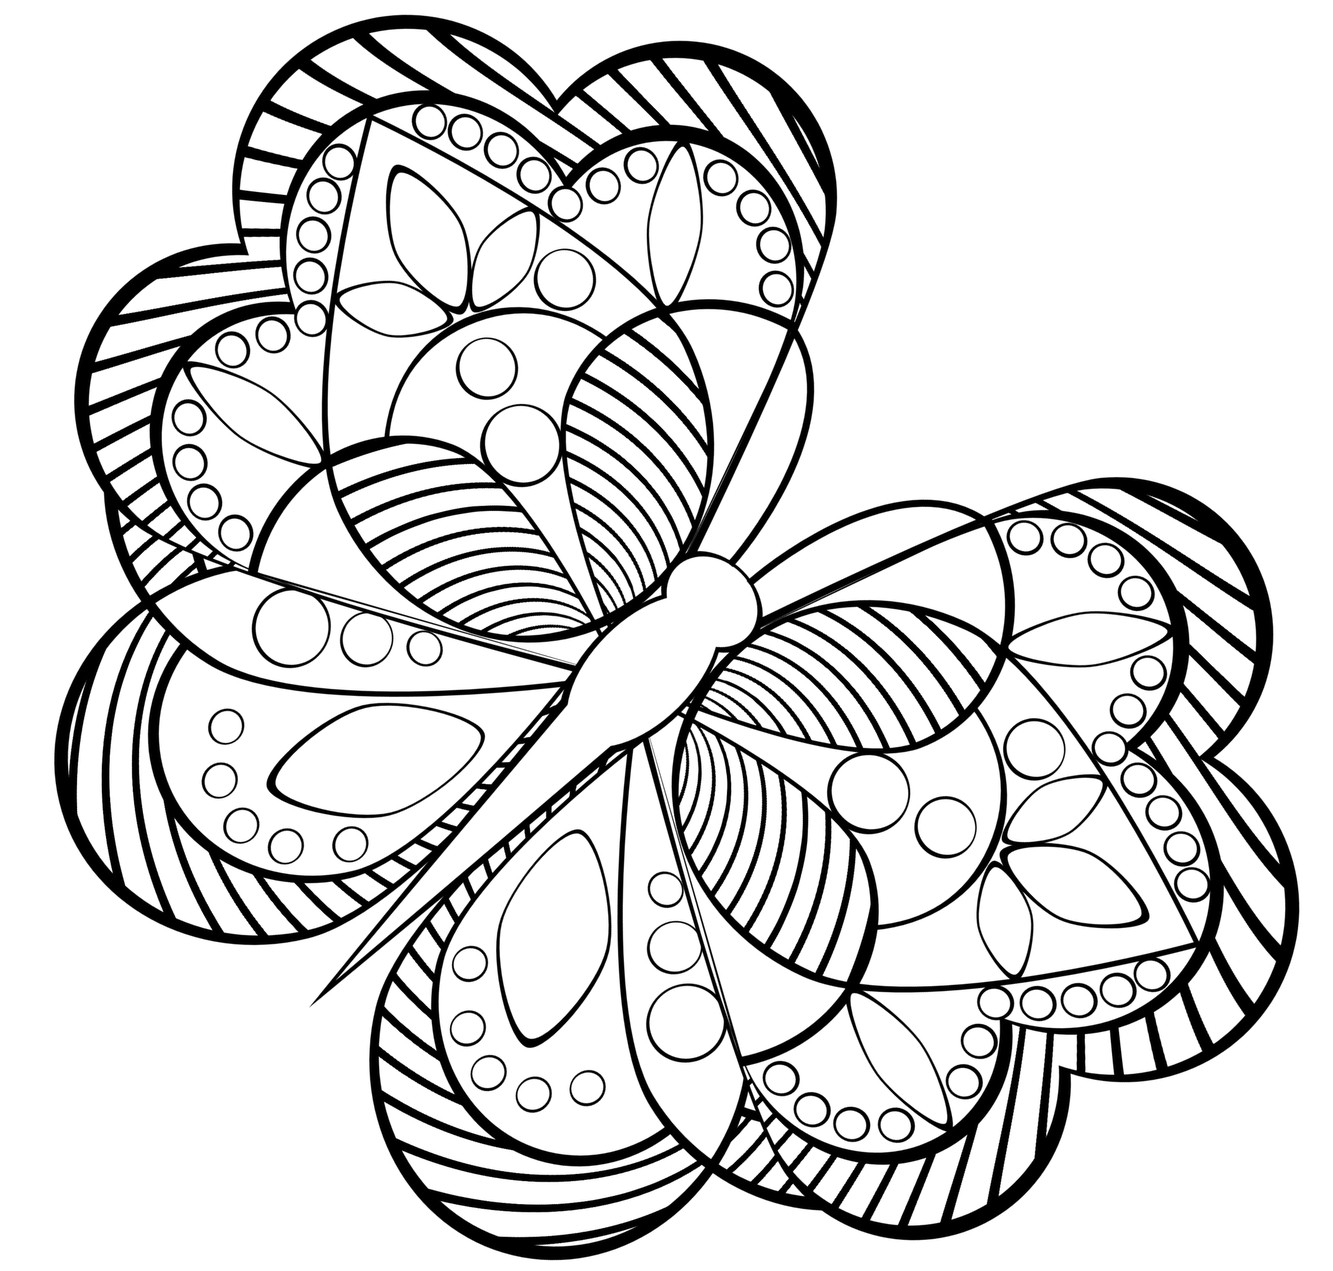 Coloring Pages For Adults Free
 Free Coloring Pages For Adults To Print Special Image 12